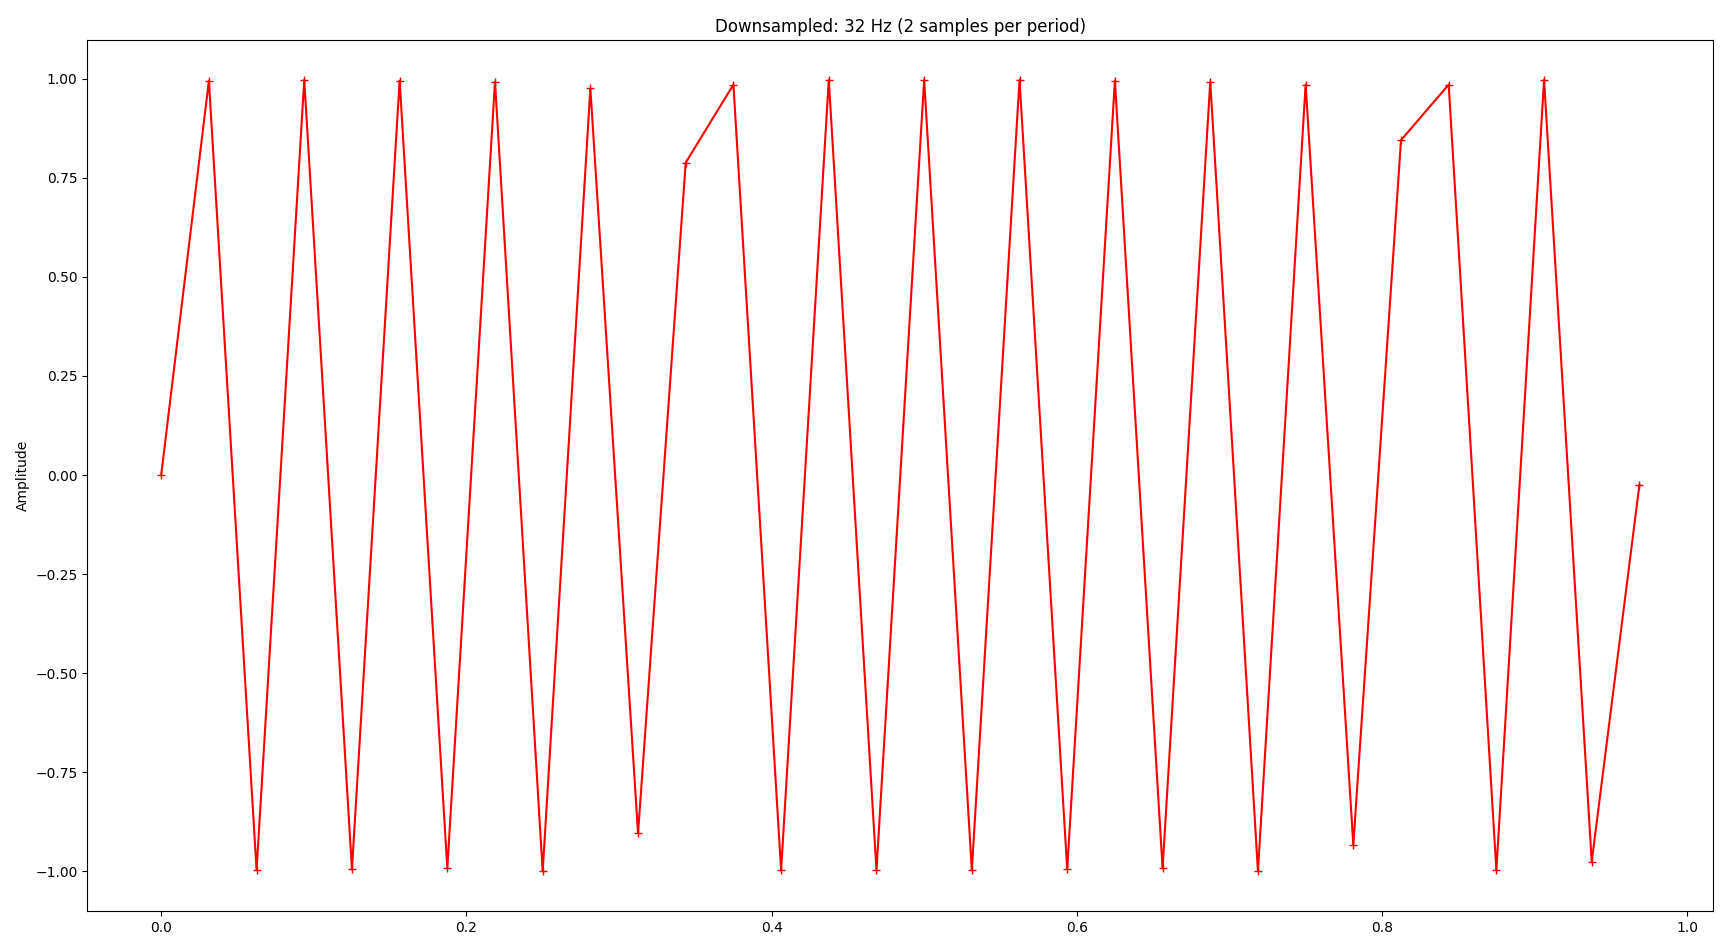 A sine wave with 16 Hz consisting of 4096 samples downsampled to 32 samples